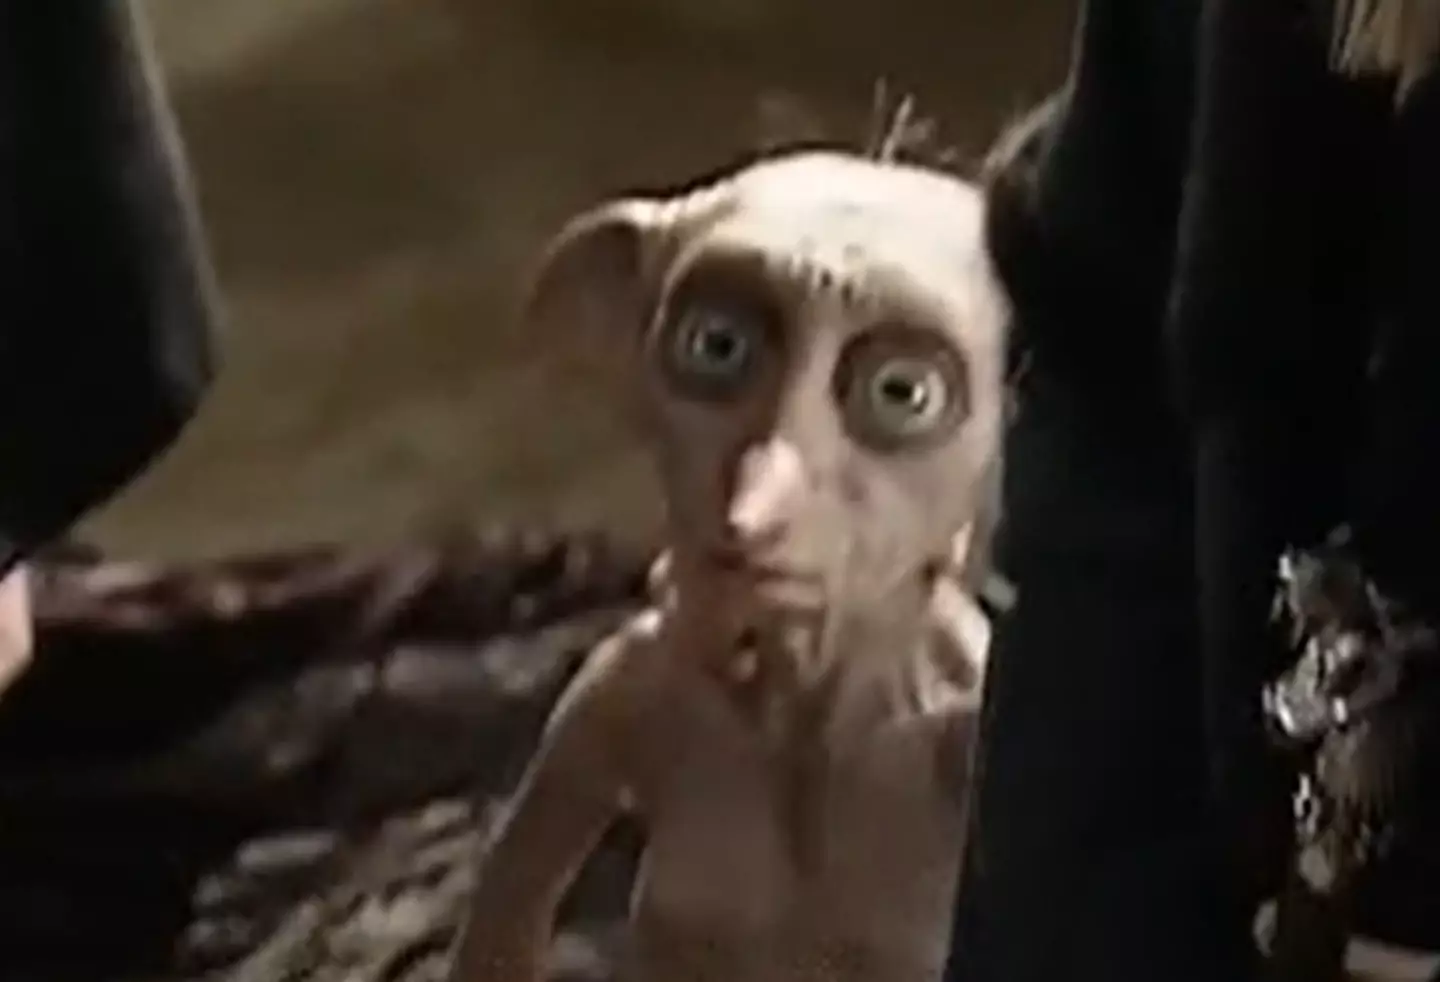 The Dobby puppet is just hauntingly creepy.